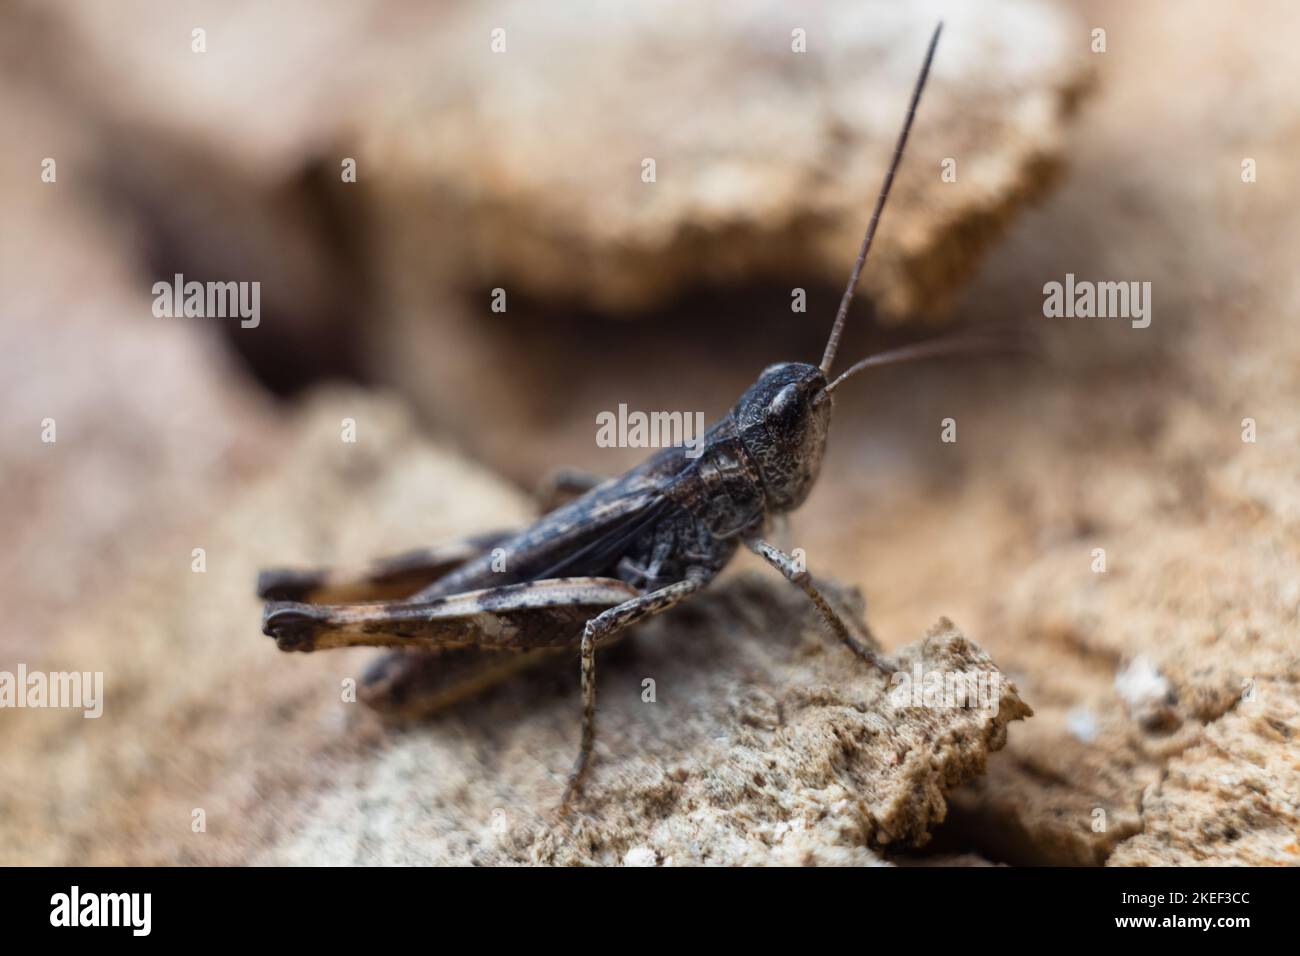 Close-up of a green grasshopper. Grasshopper on the stone. Stock Photo